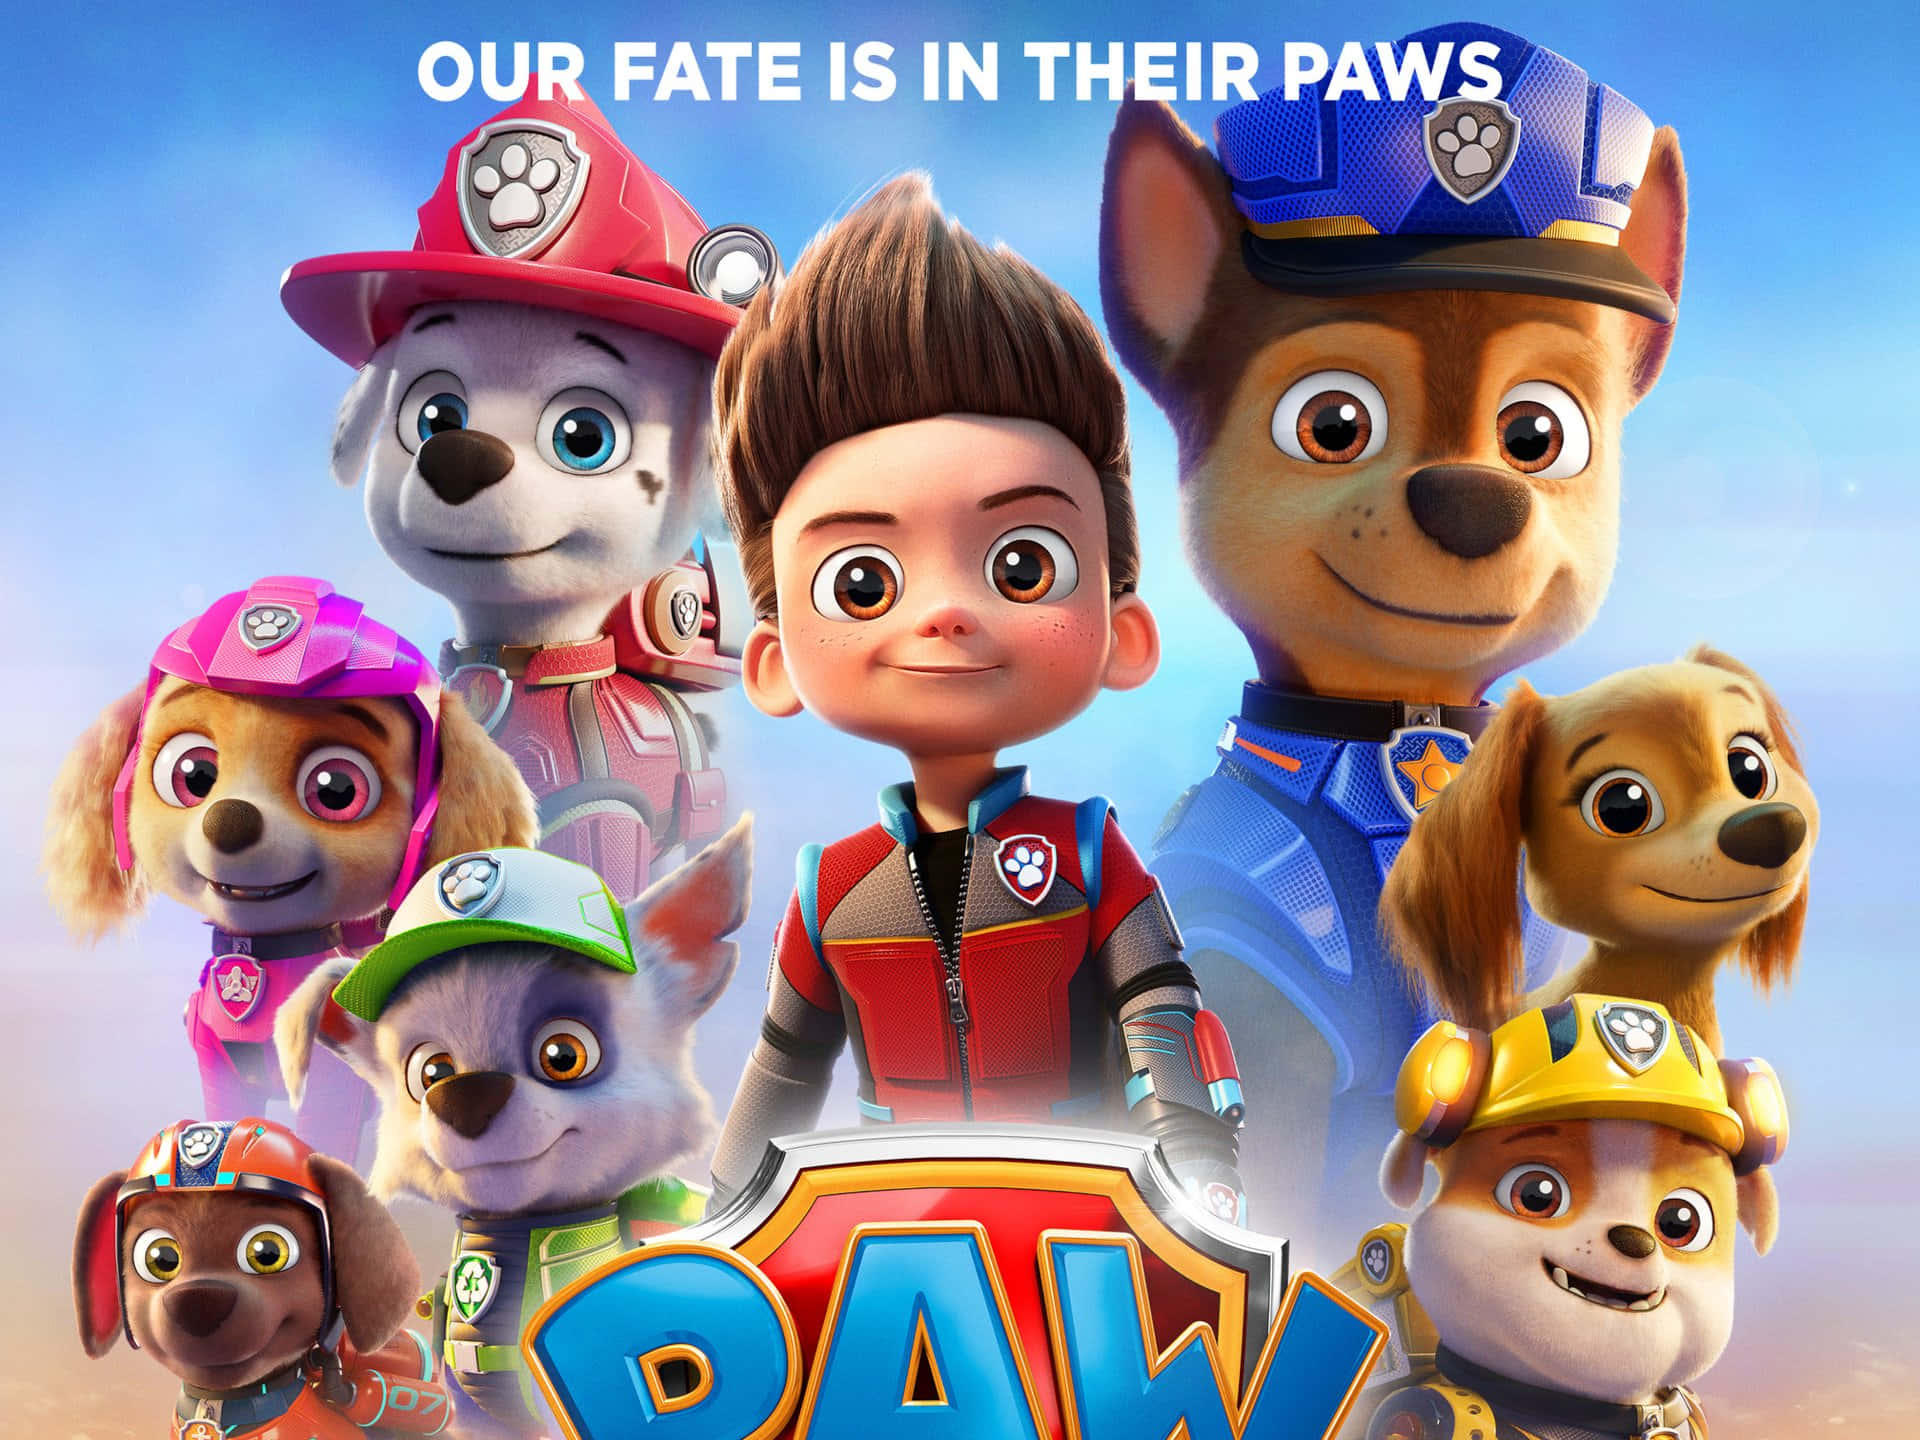 Say hello to Skye of the Paw Patrol! Wallpaper